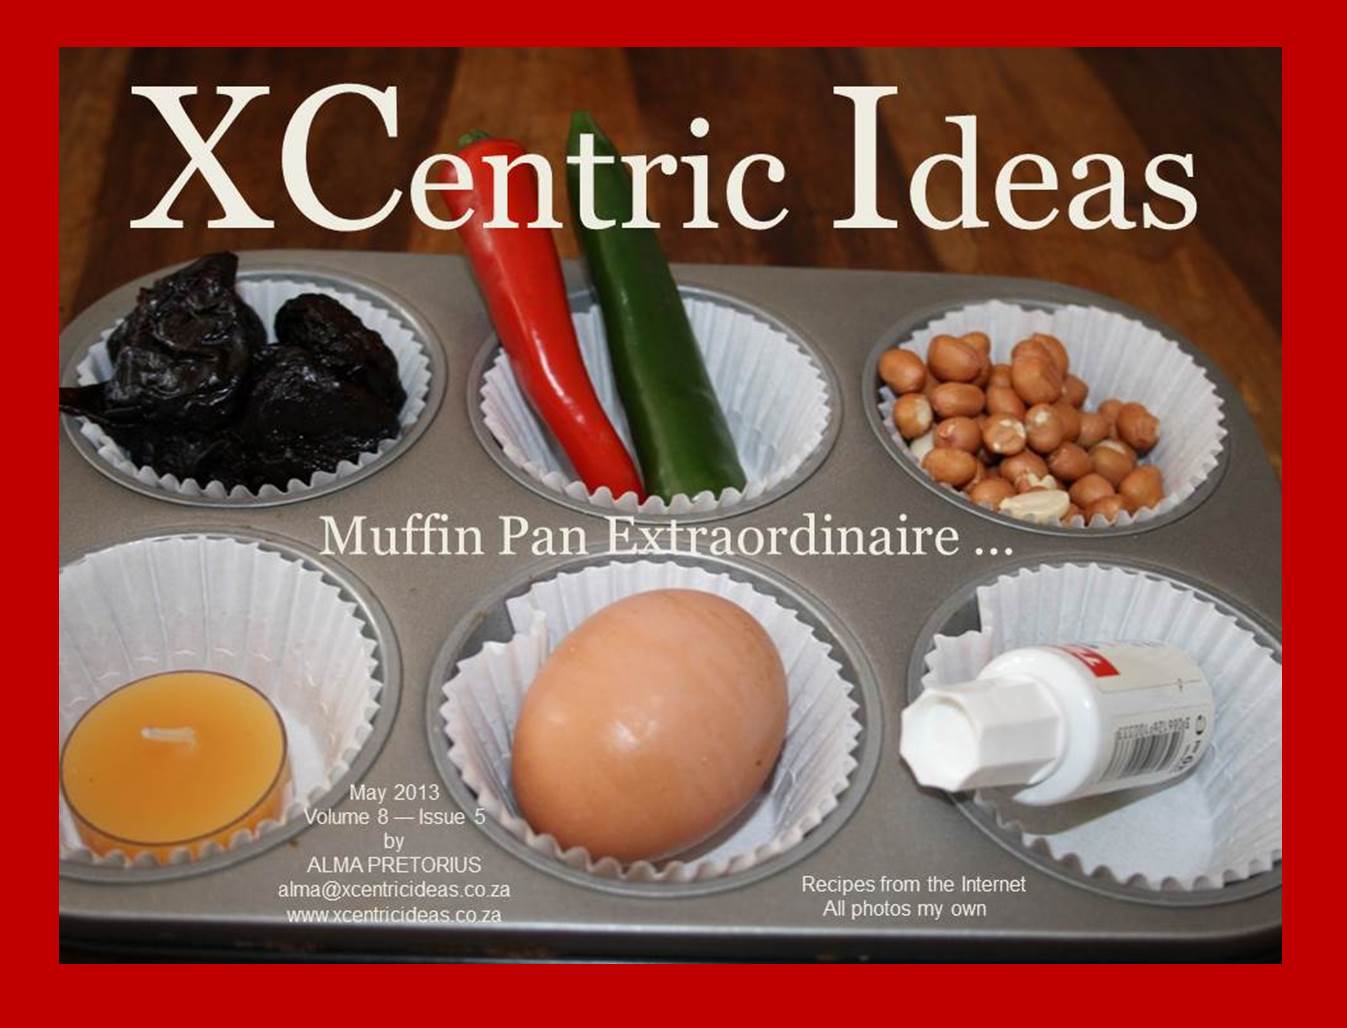 XCentric Ideas 2013 Issue 5